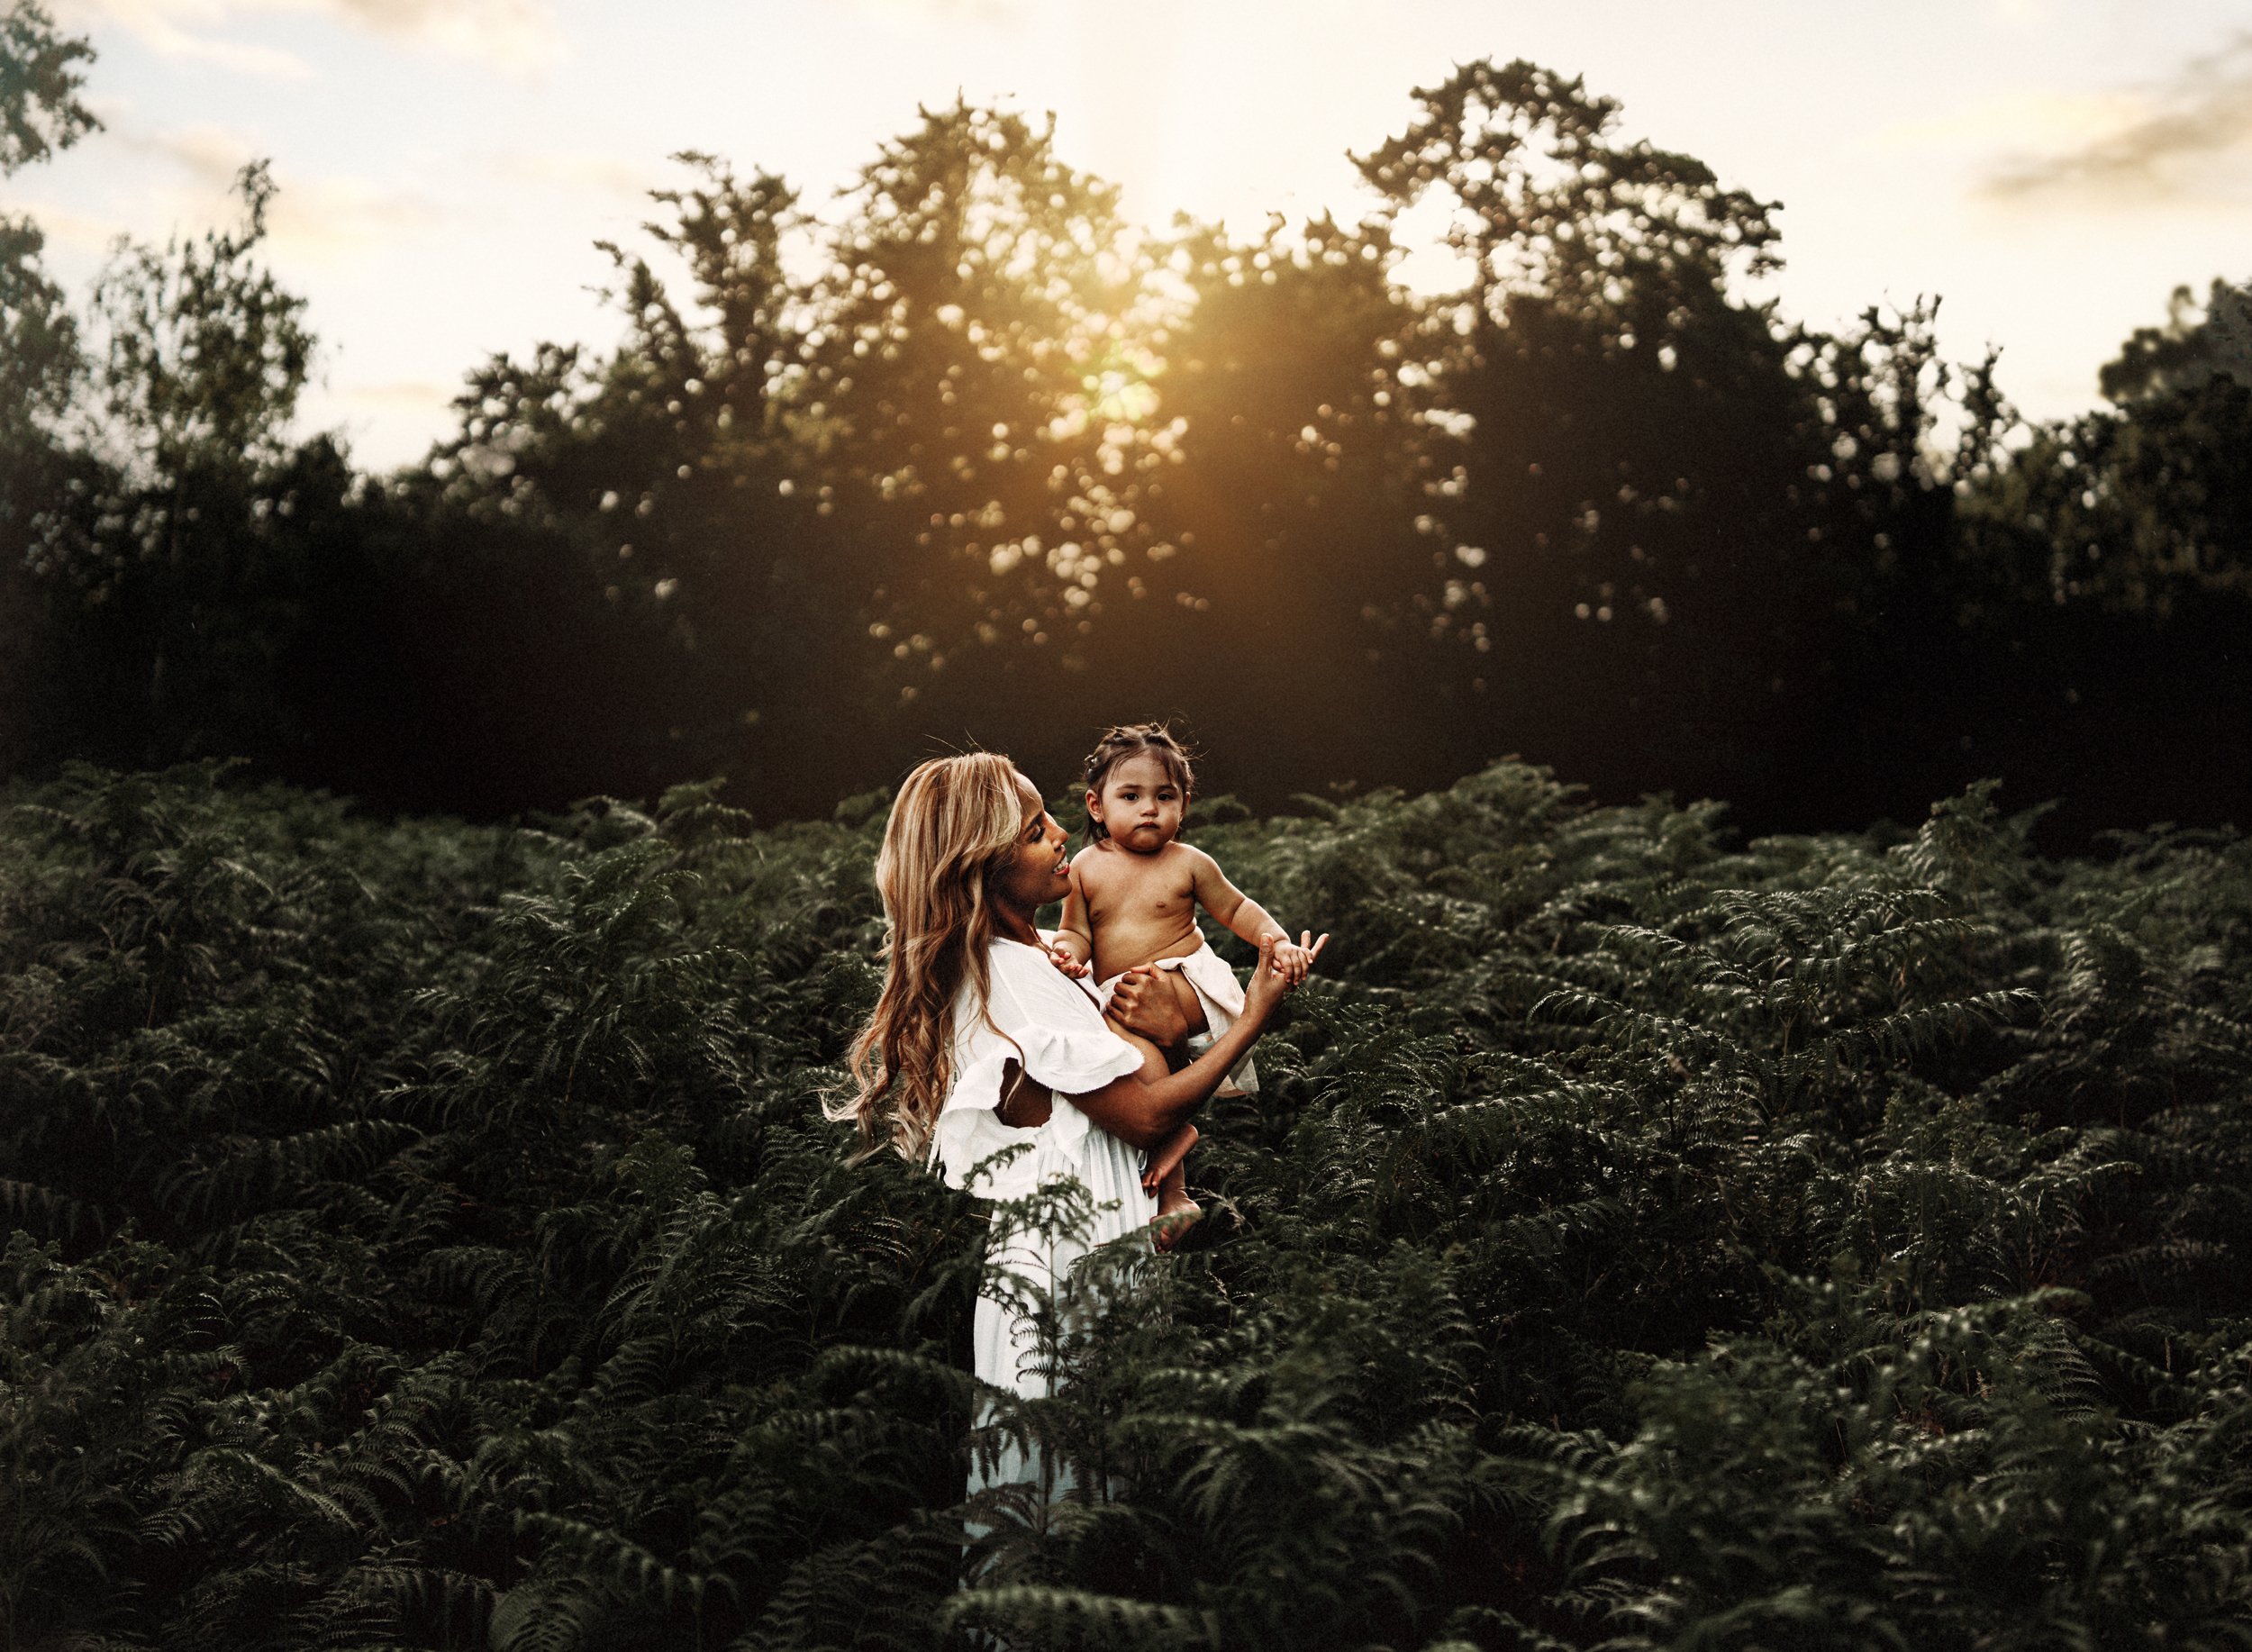 emotive-motherhood-photo-session-with-mother-and-daughter-in-a-patch-of-ferns-at-sunset-in-landtuhl-kmc-germany (3).jpg